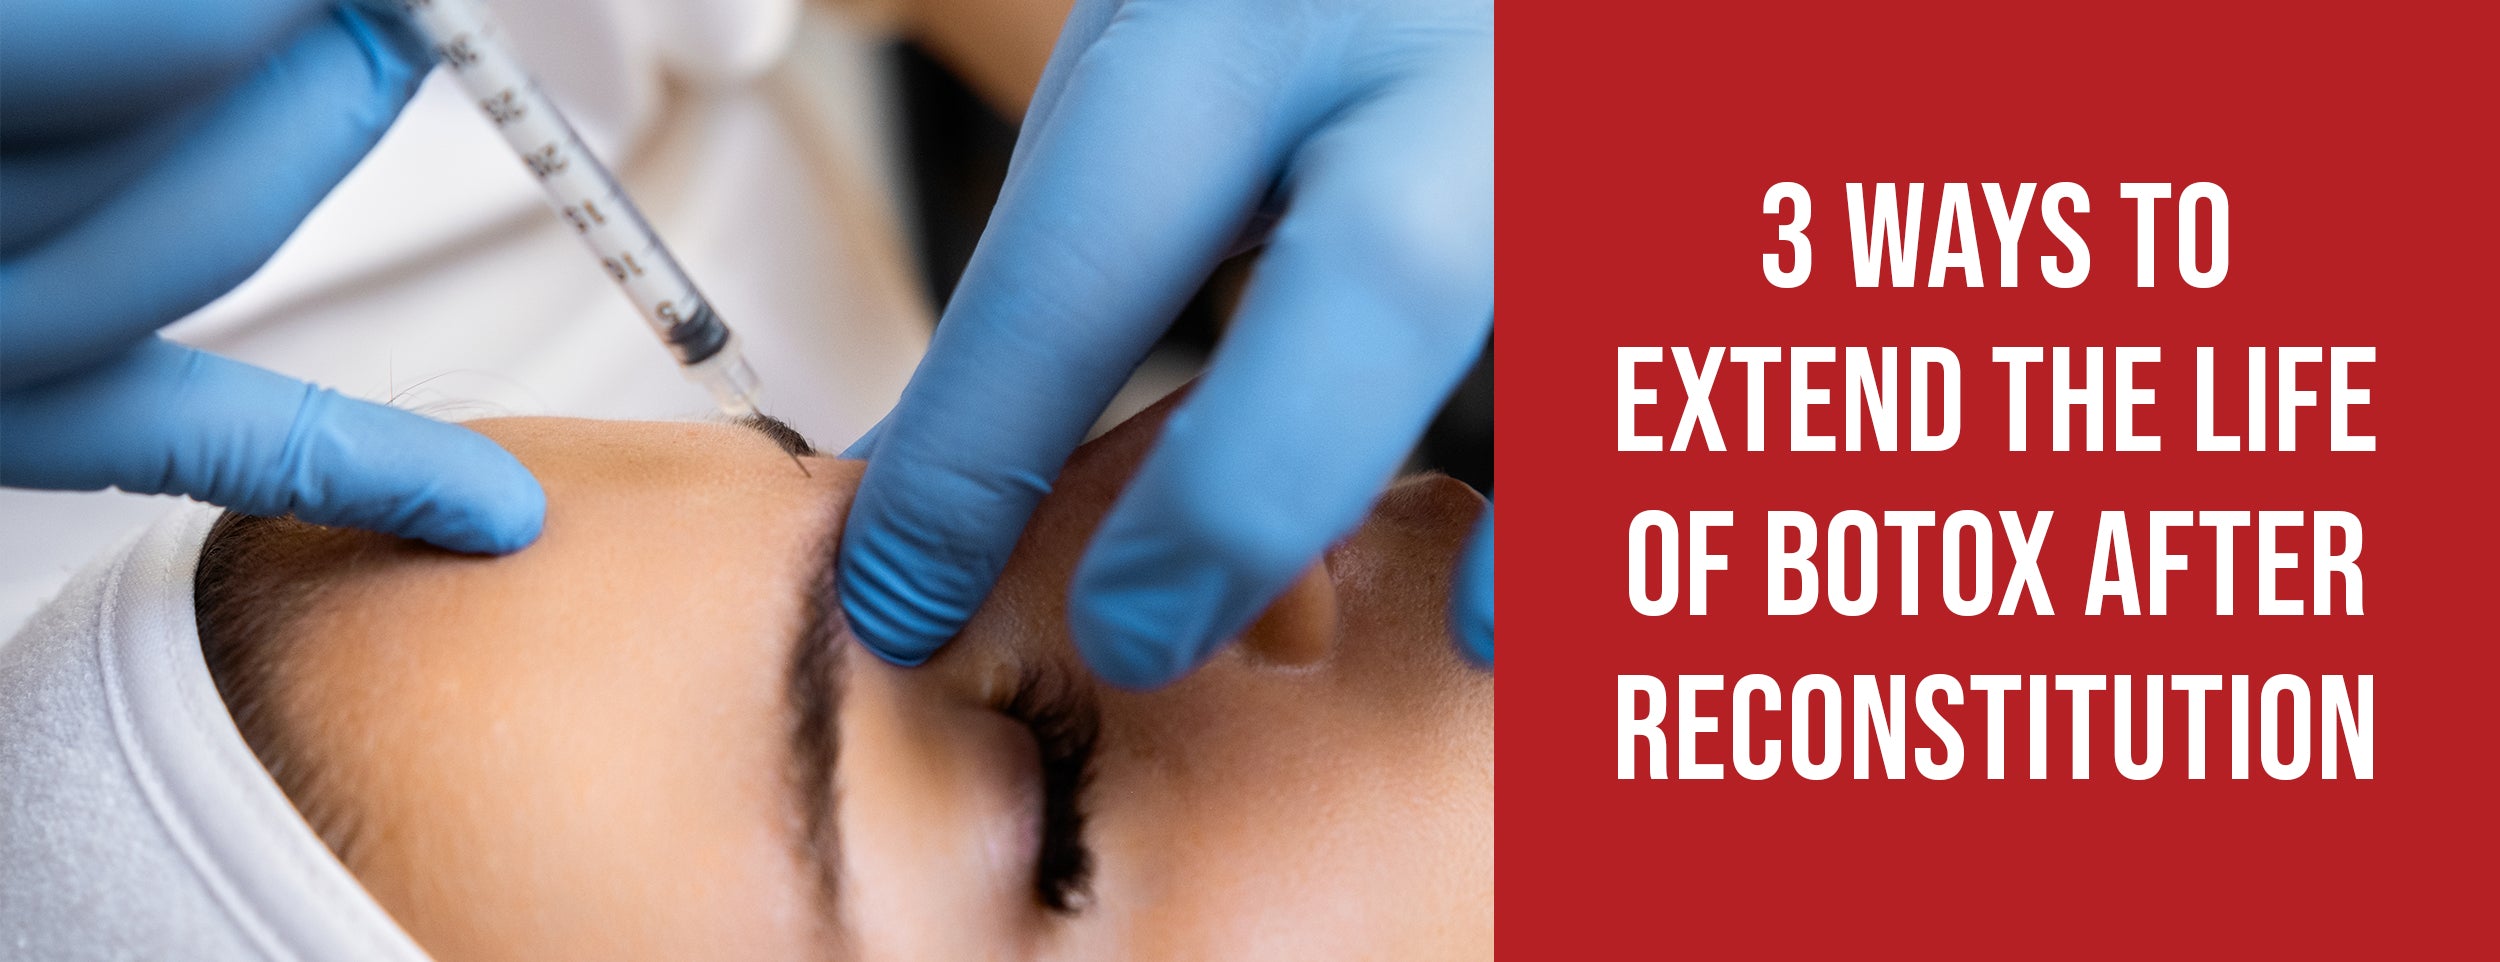 3 Ways to Extend Botox's Life after Reconstitution